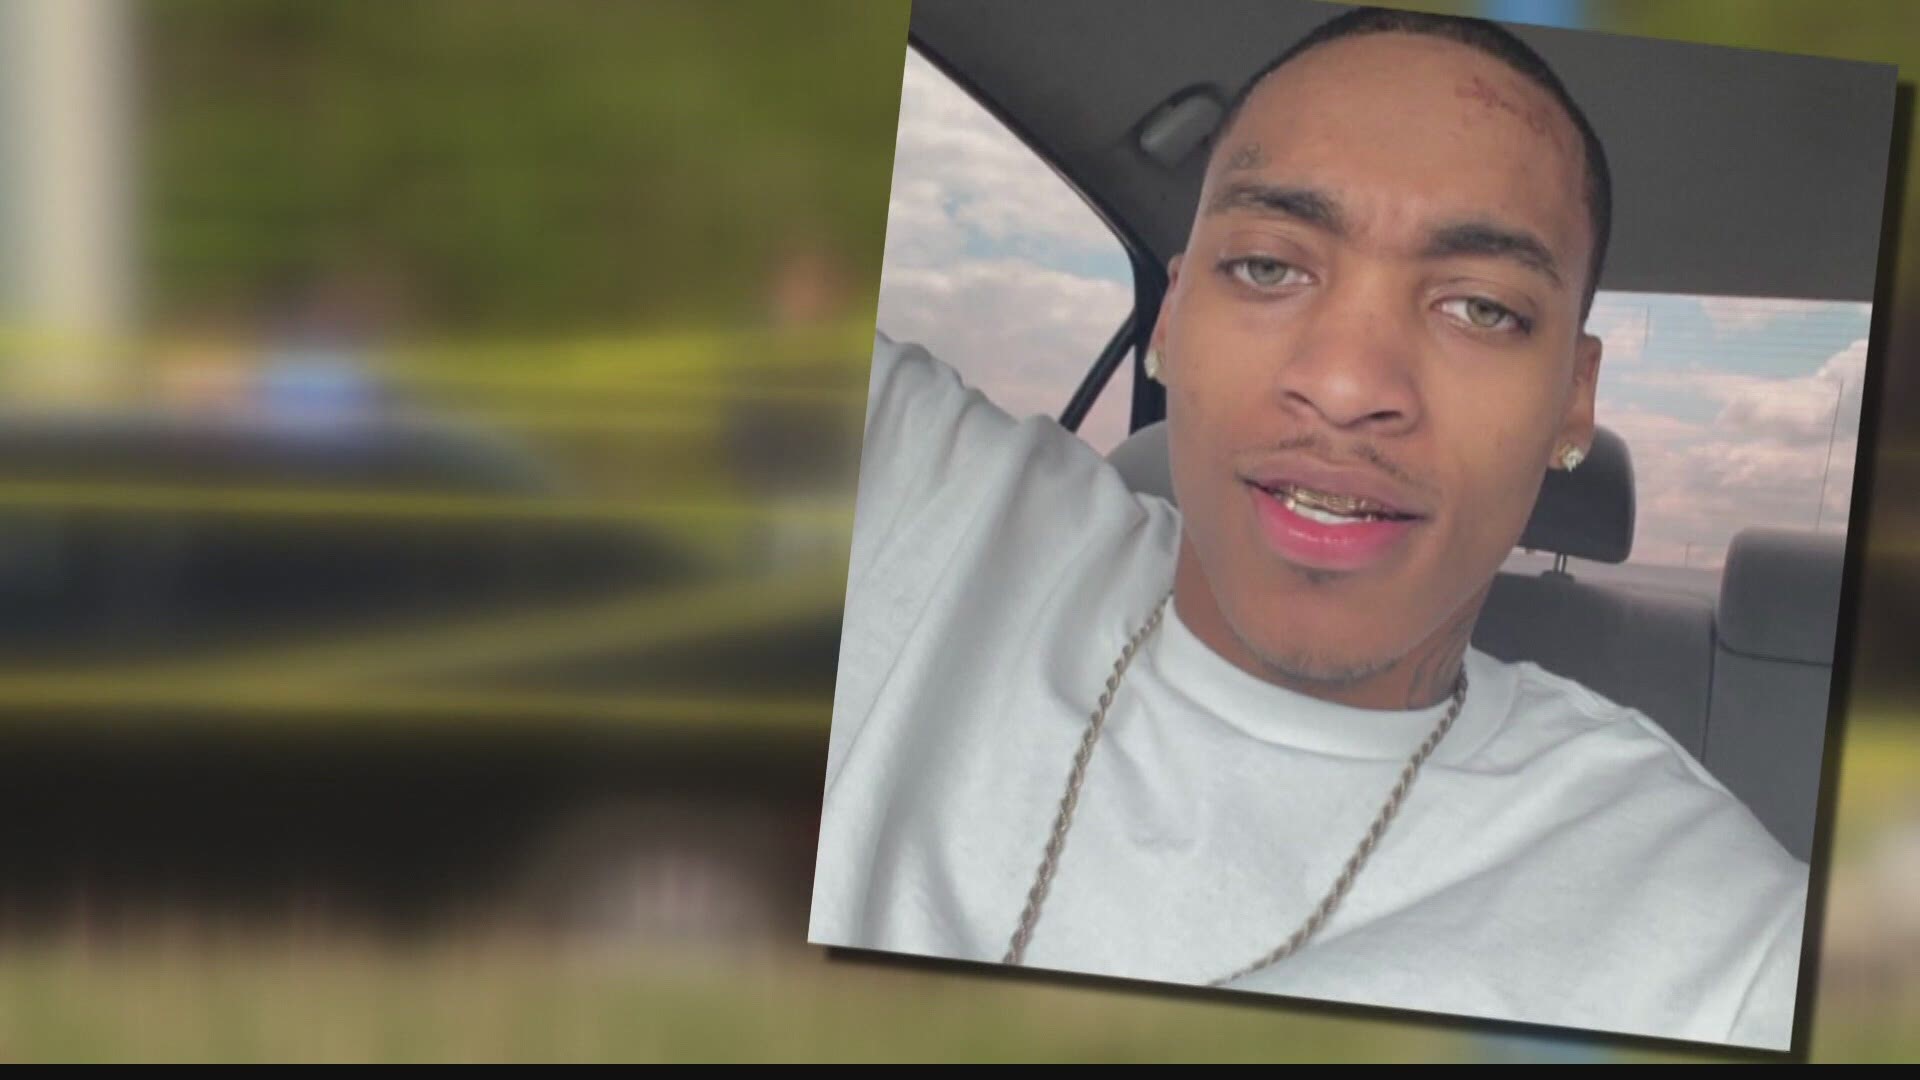 It's been nearly 3 months since Dreasjon Reed was killed by metro police after a chase and now his autopsy report is being released to the family.